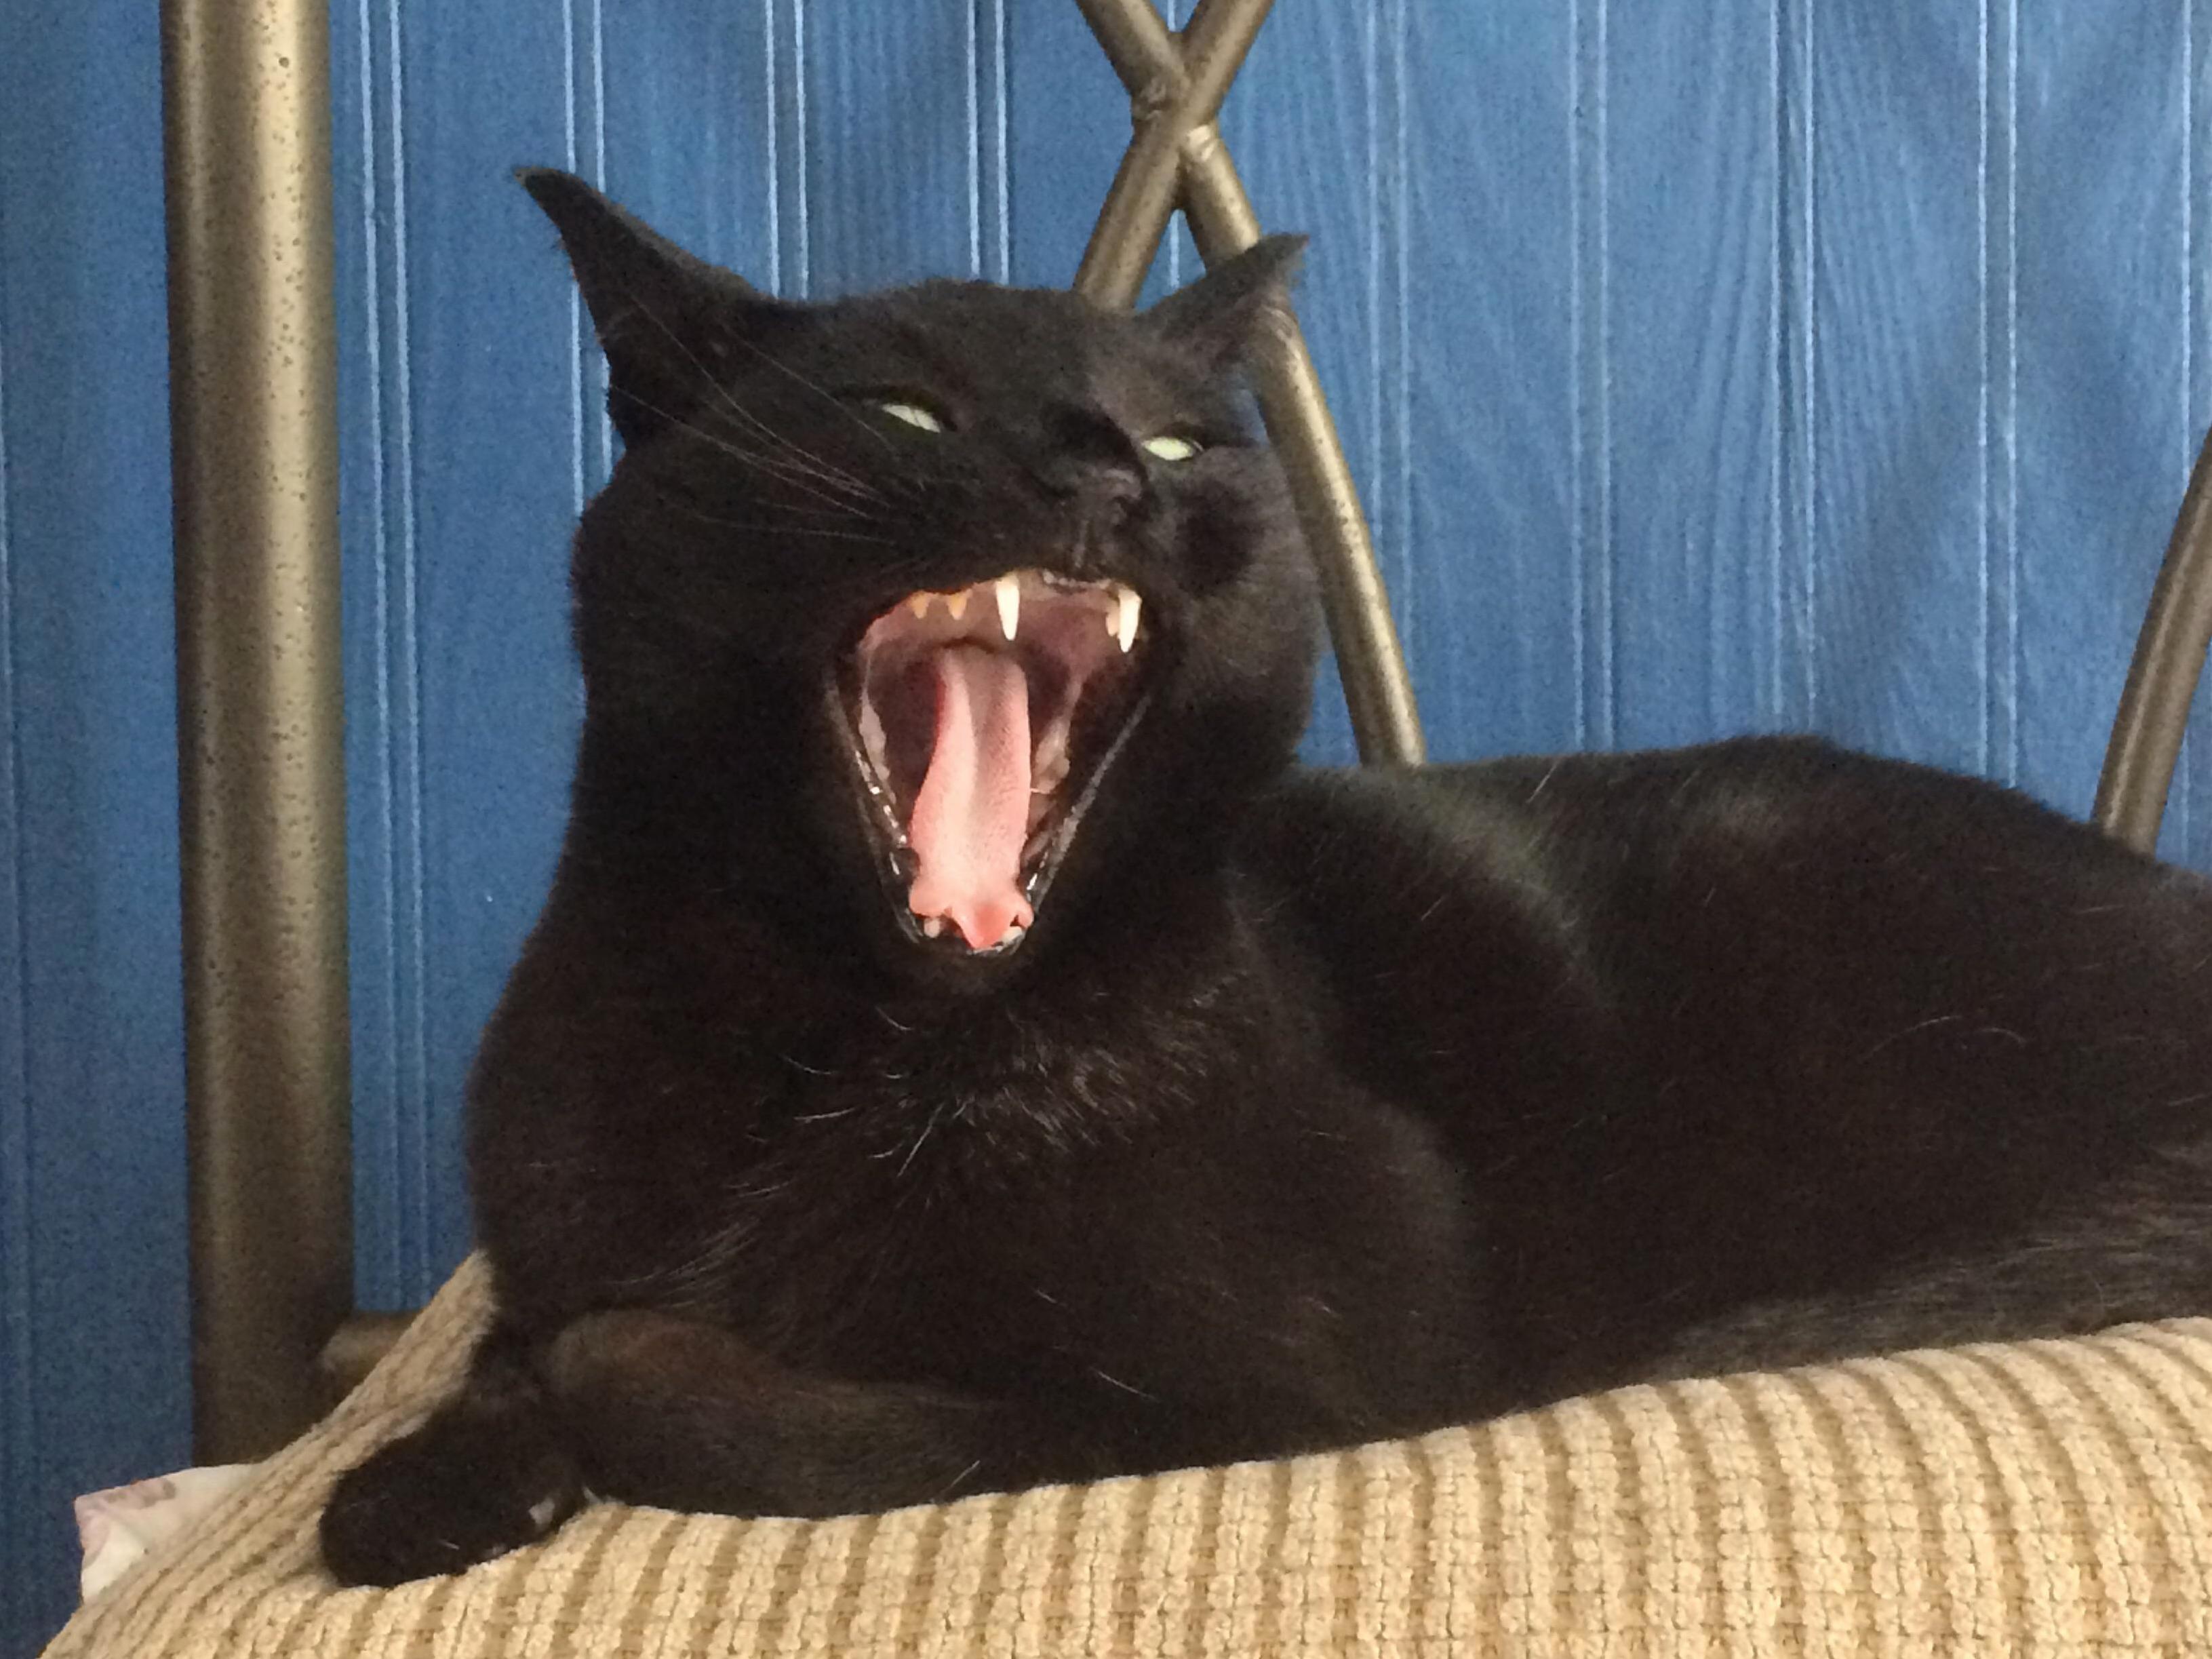 Caught a picture of my cat mid yawn